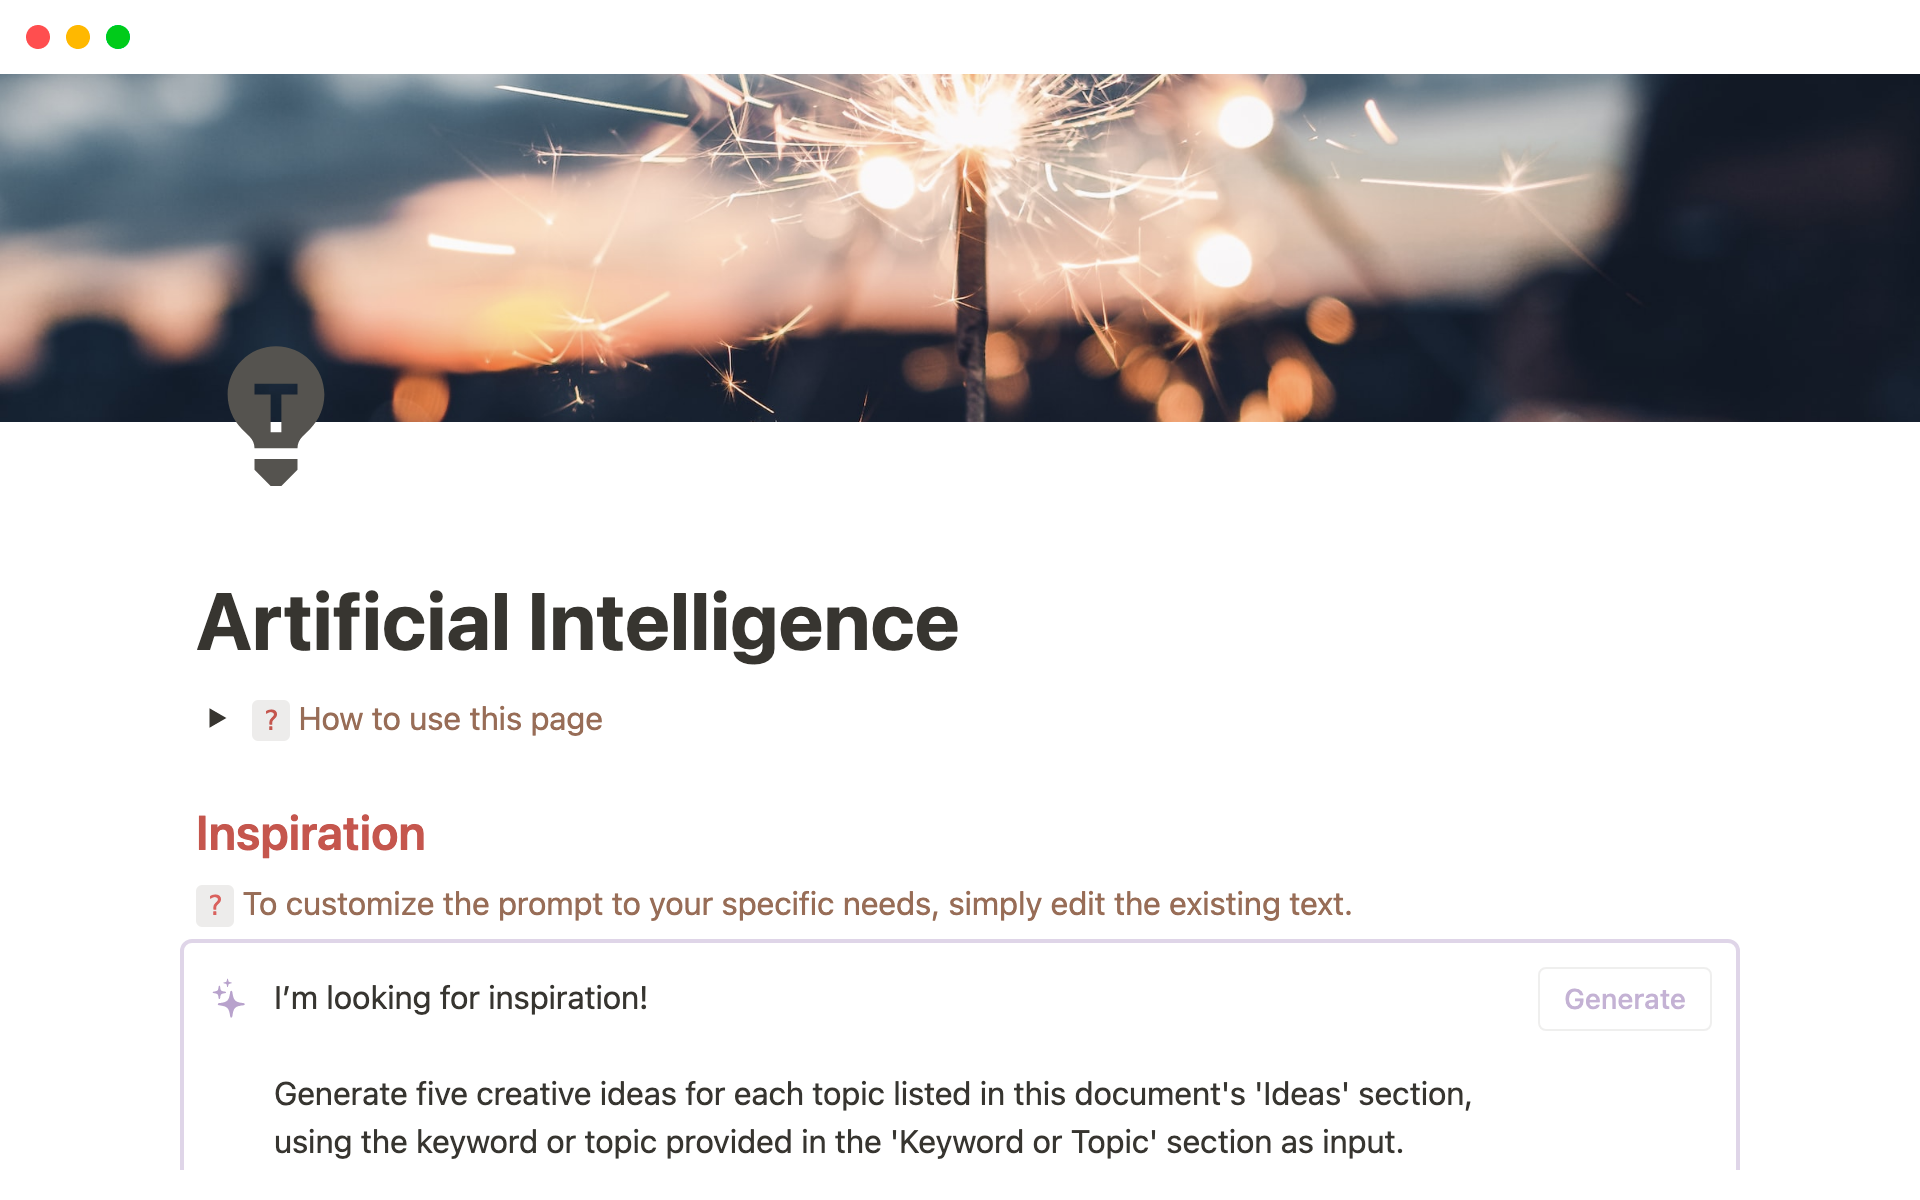 AI Mind Master template generates creative ideas for specific topics with the possibility of delving deeper into the topic.